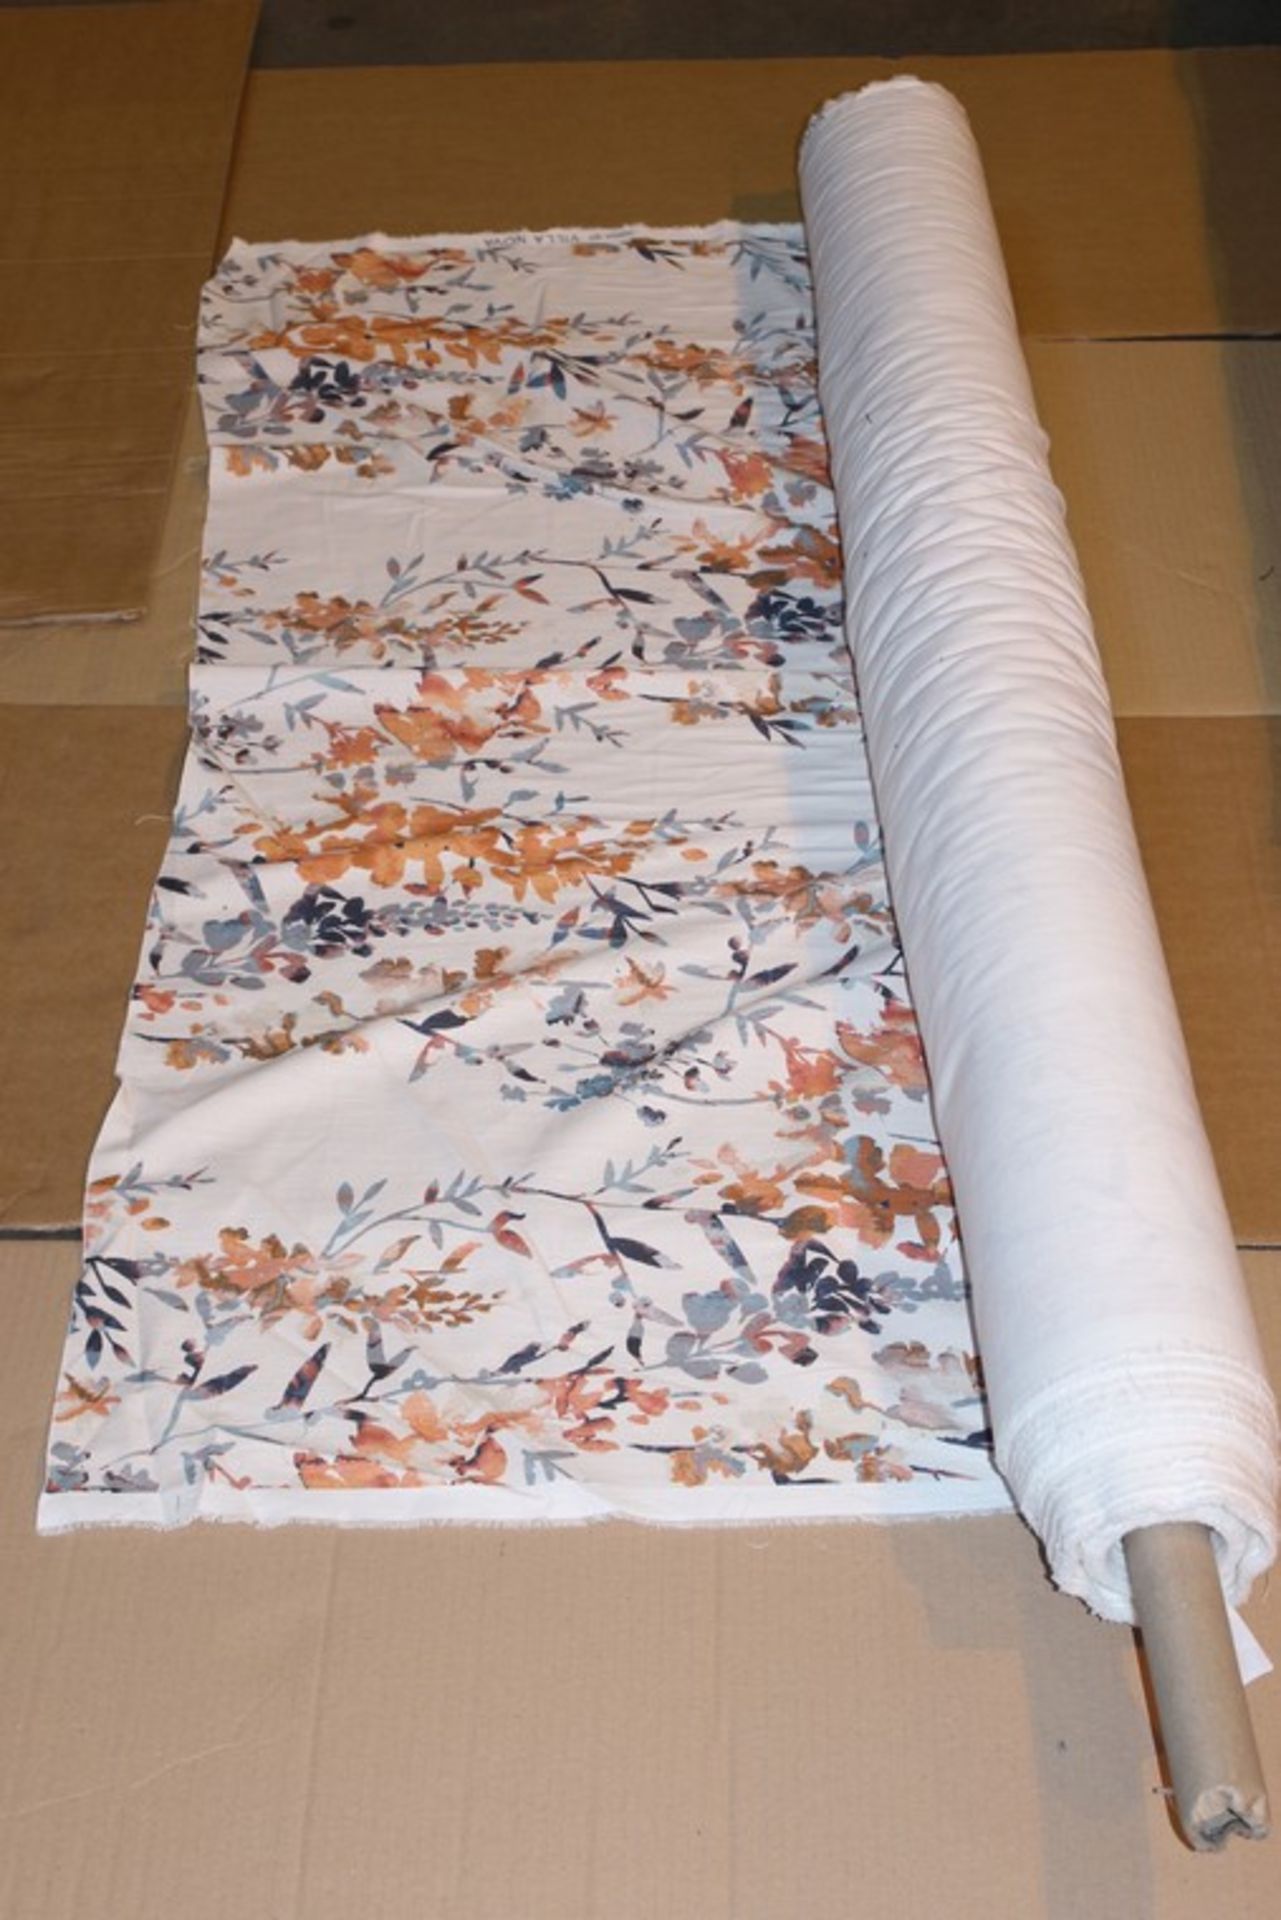 1 x ROLL OF HANA V3233(AW16) FABRIC RRP £740 (02.01.18) (4500381) *PLEASE NOTE THAT THE BID PRICE IS